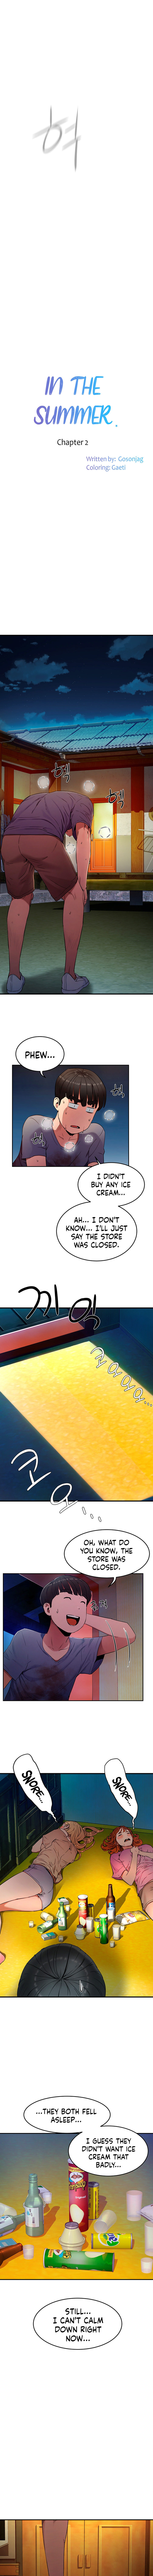 In The Summer - Chapter 2 Page 4